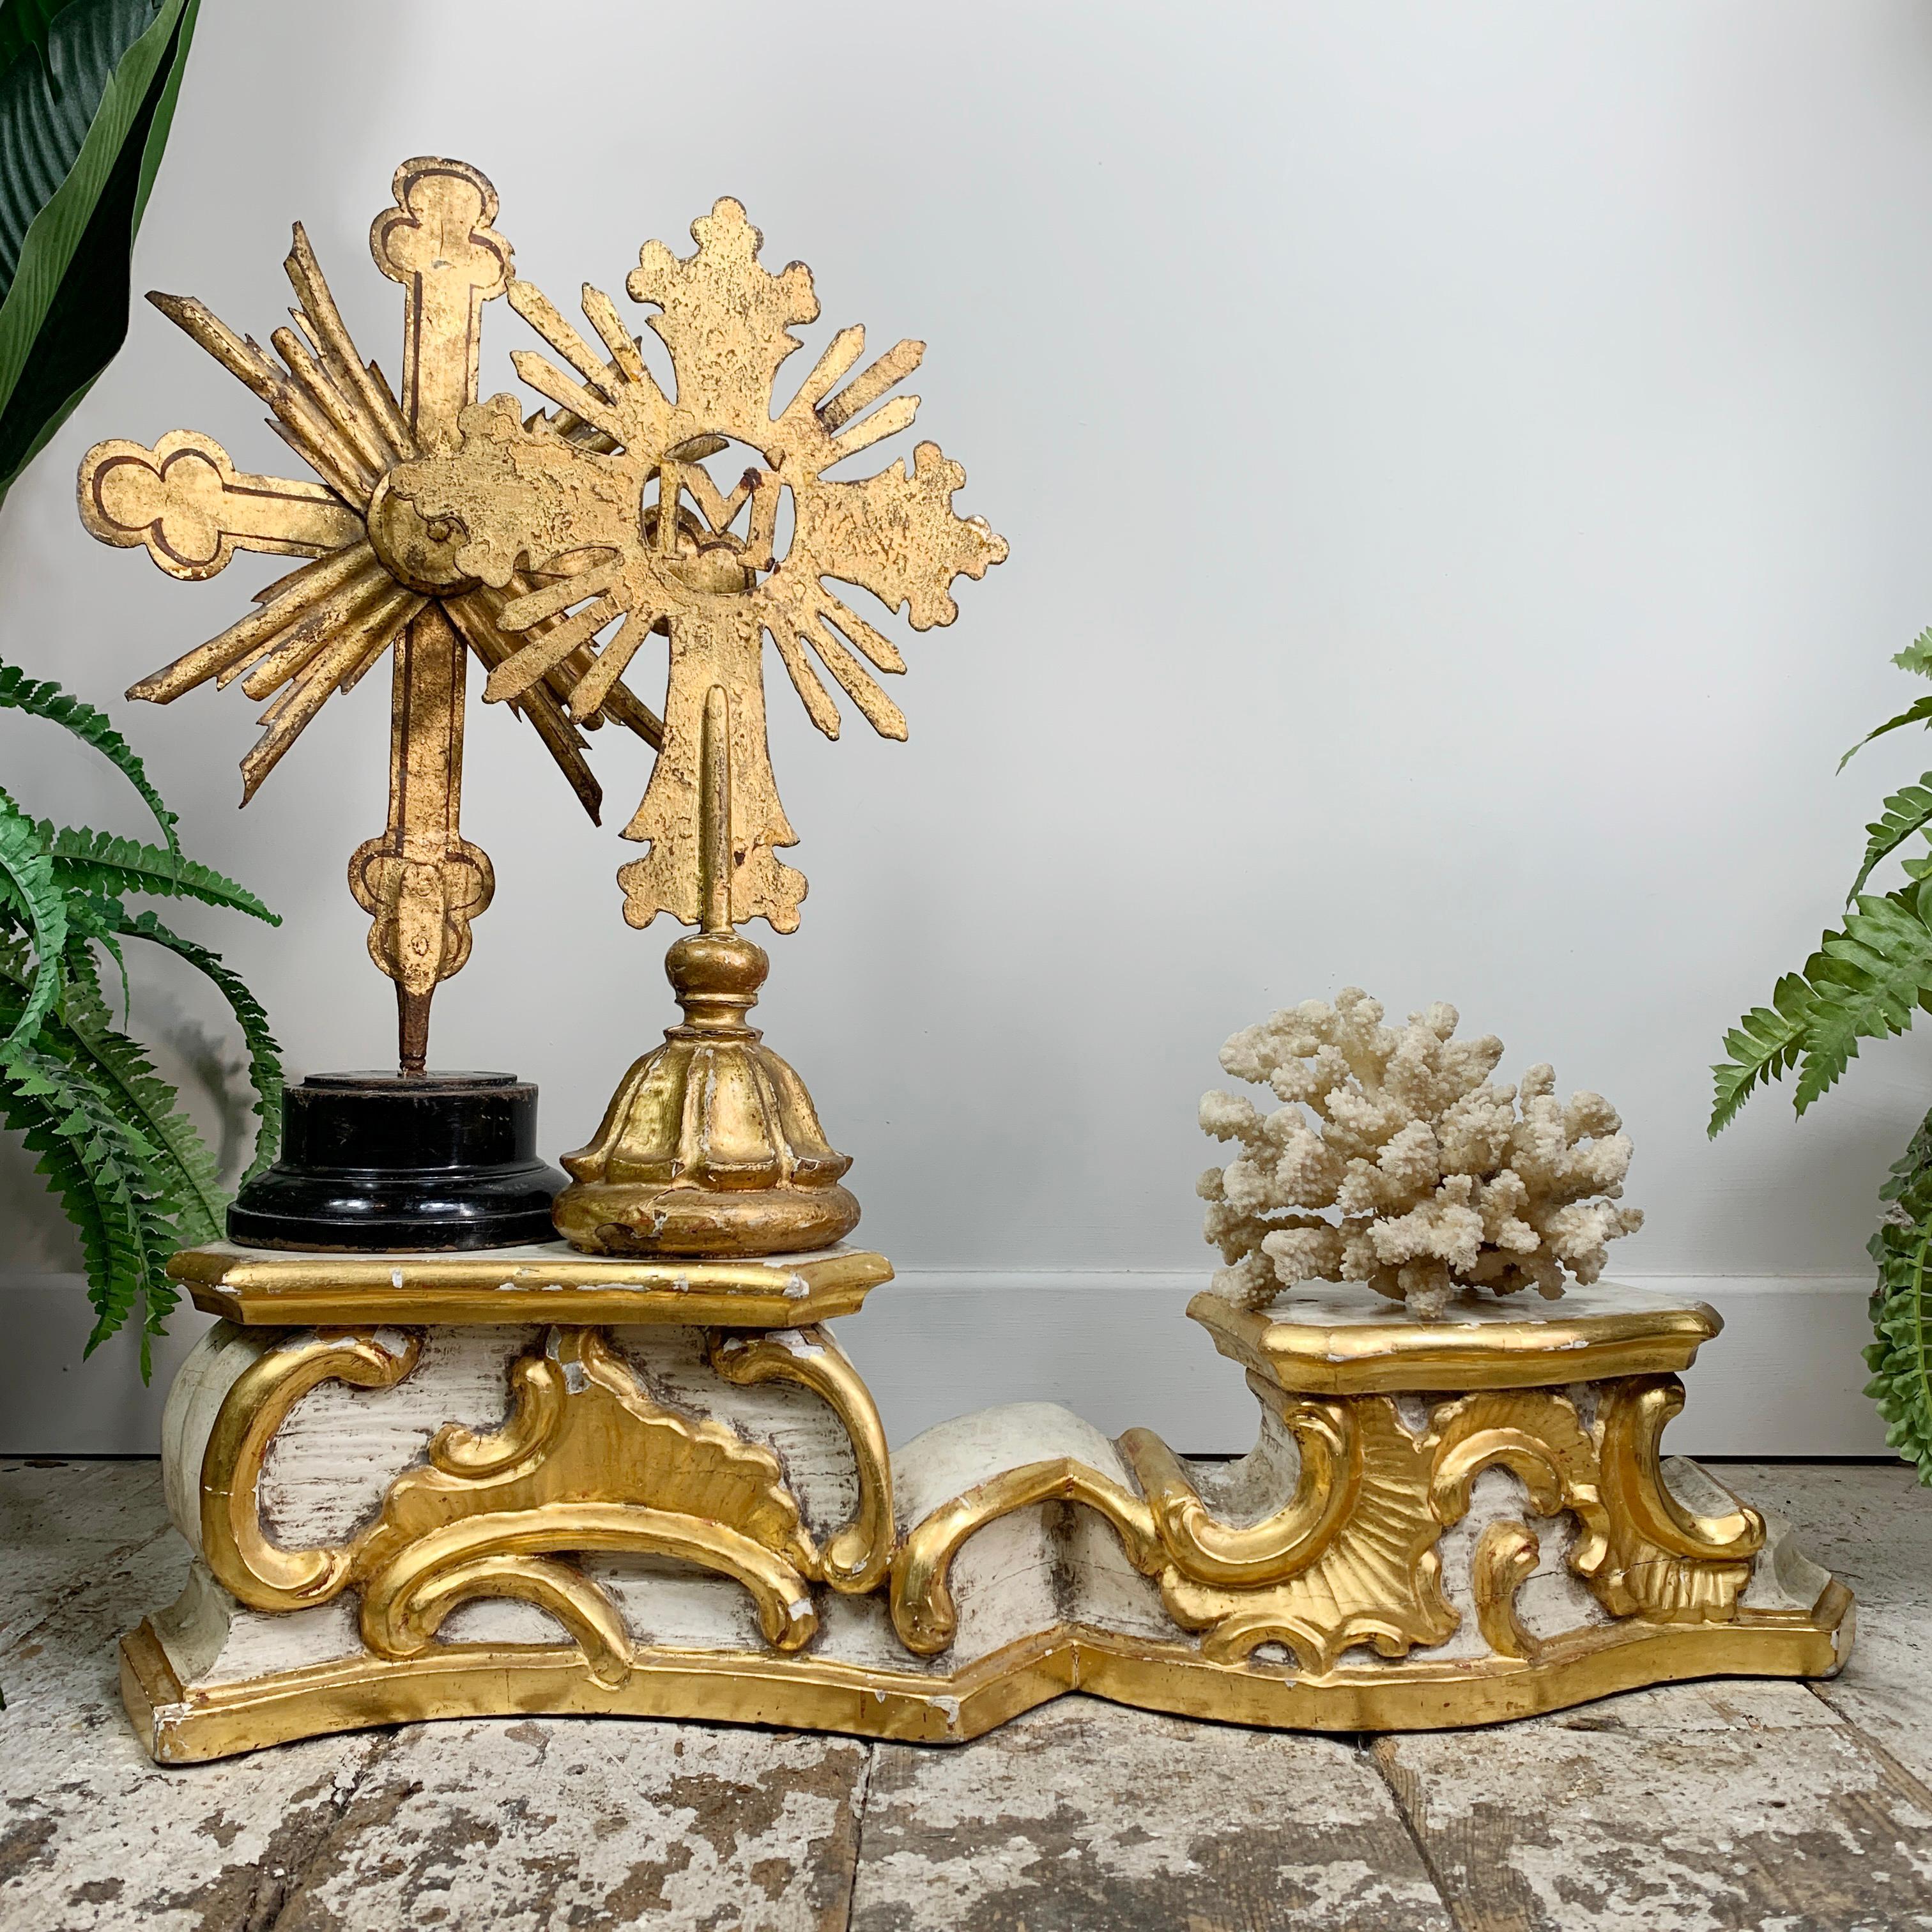 A superb baroque stand, crafted from wood (possibly Oak) with painted design in gilt, dating to the 18th century, German, these would originally have displayed the statues of the saints within the altar at a church or cathedral.

Very usable and